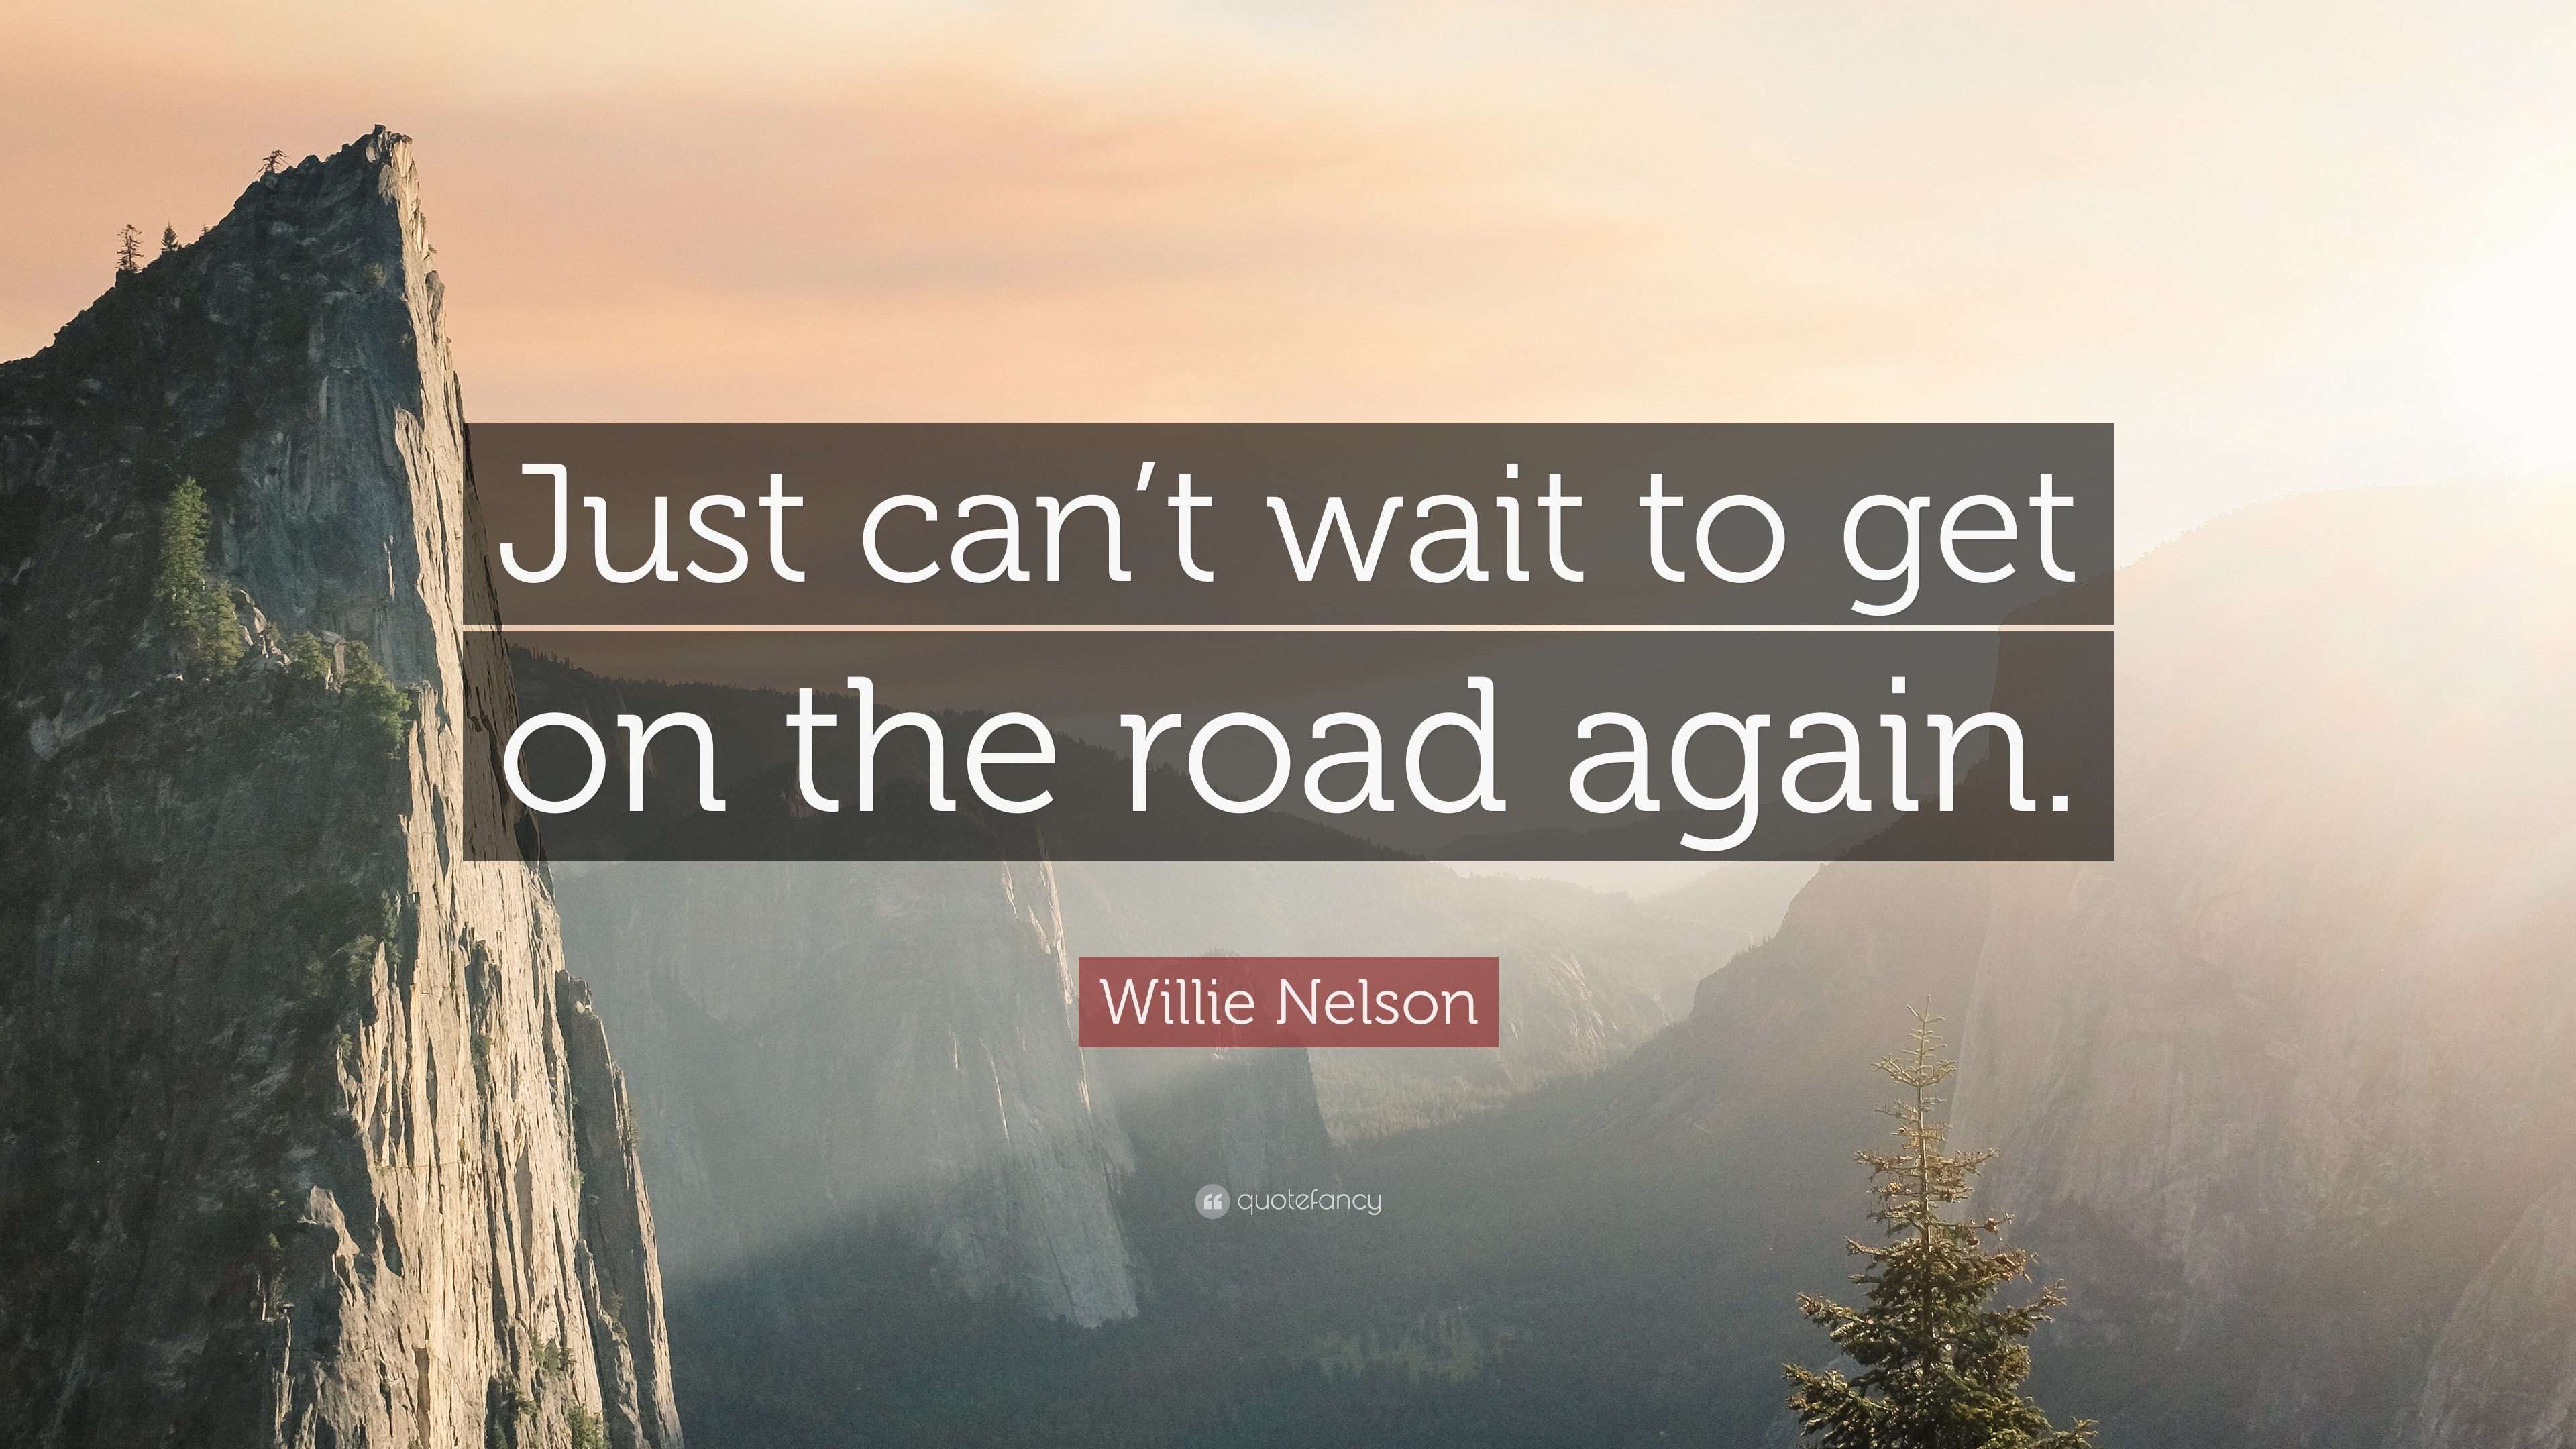 3840x2160 Willie Nelson Quote: “Just can't wait to get on the road again